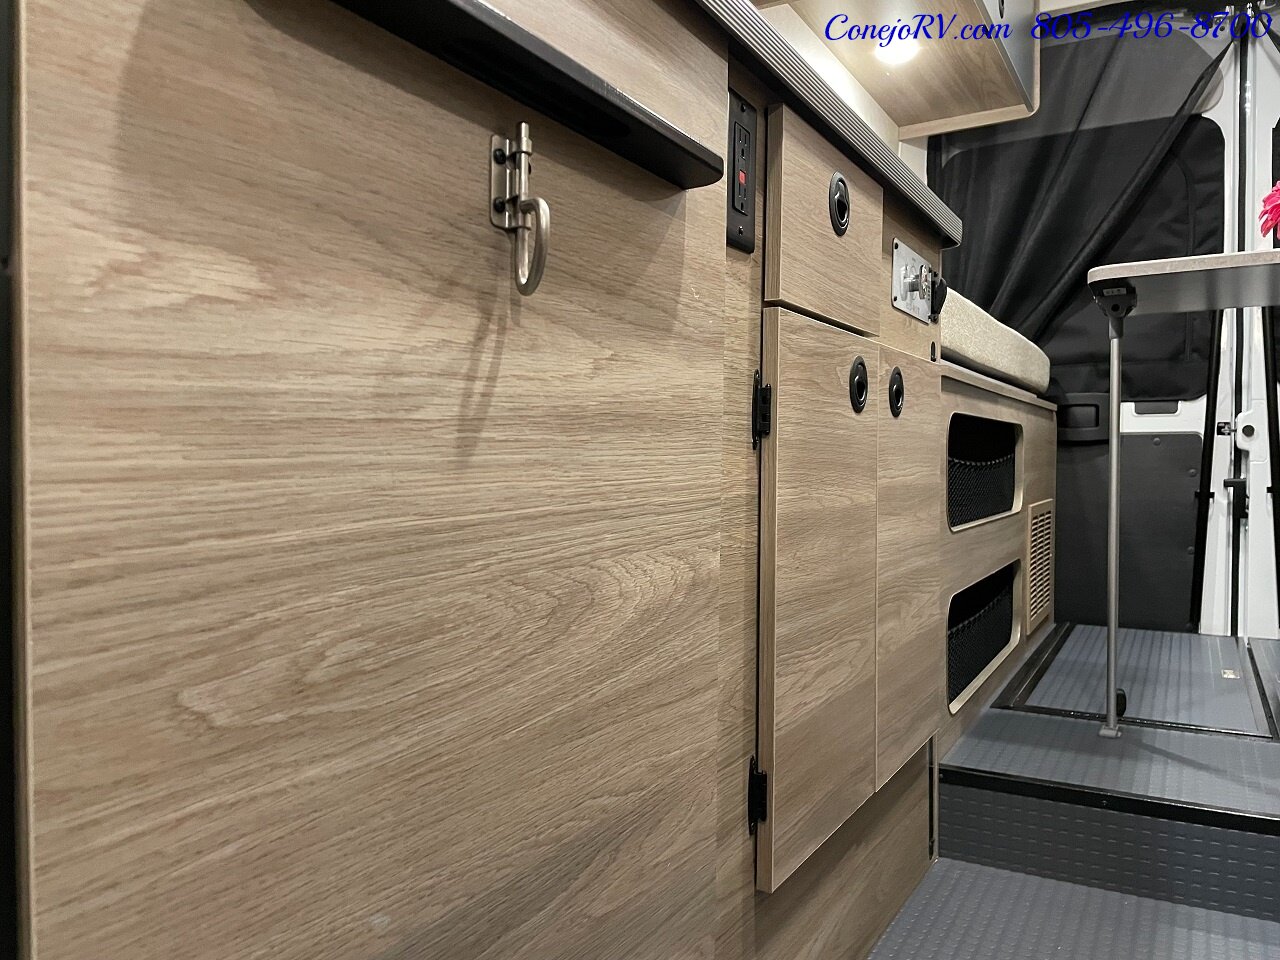 2023 WINNEBAGO Solis 59P Murphy Bed Pop Top Full Galley New Chassis  Adaptive Cruise - Photo 13 - Thousand Oaks, CA 91360